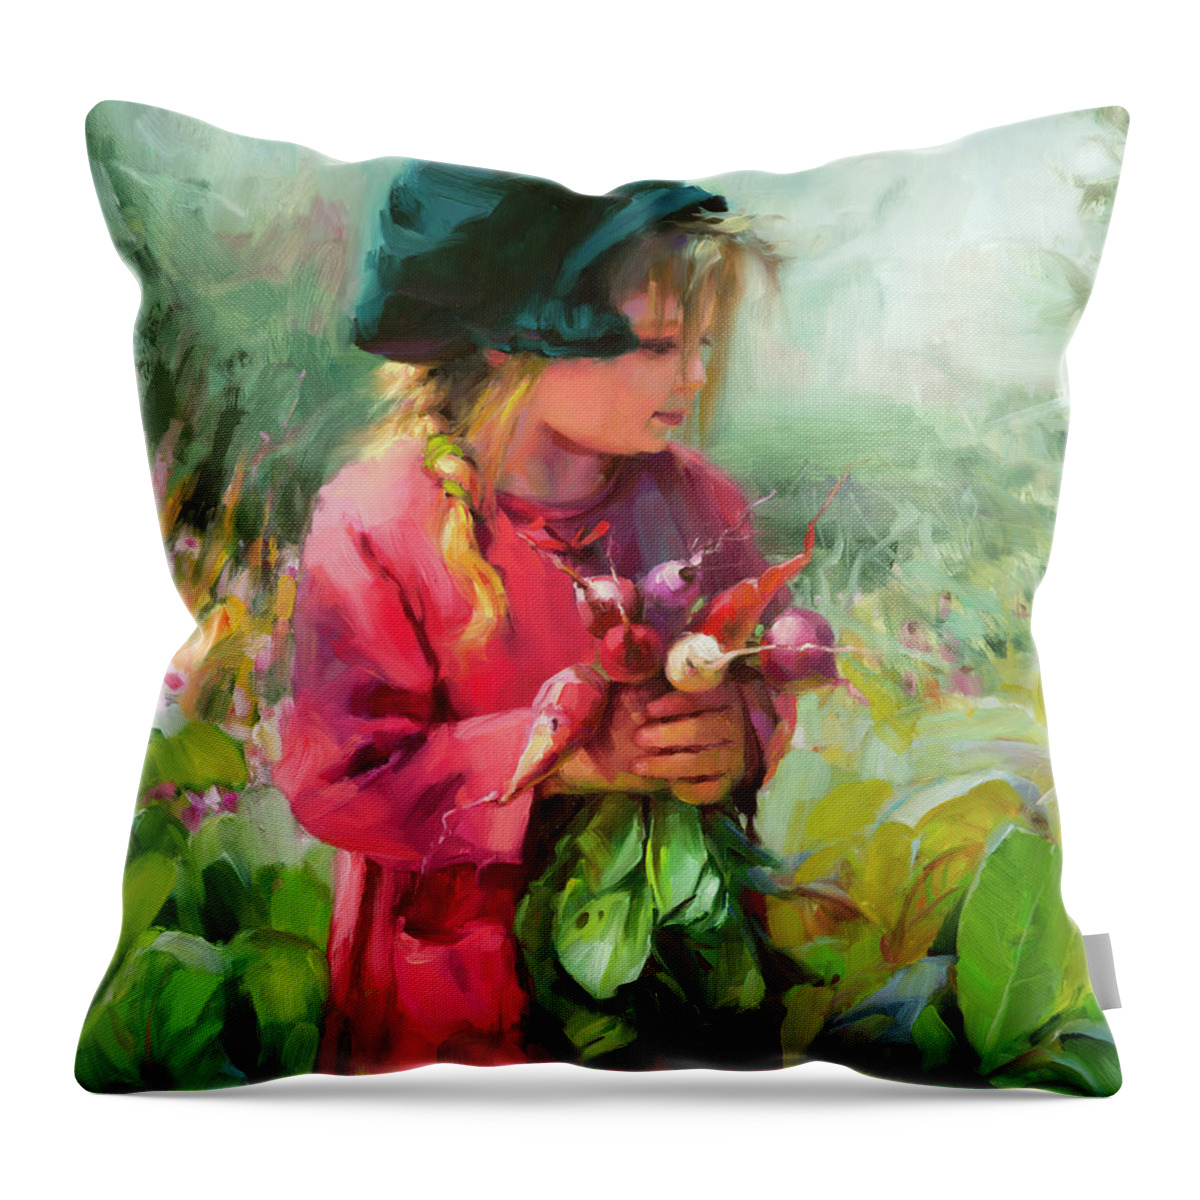 Child Throw Pillow featuring the painting Child of Eden by Steve Henderson